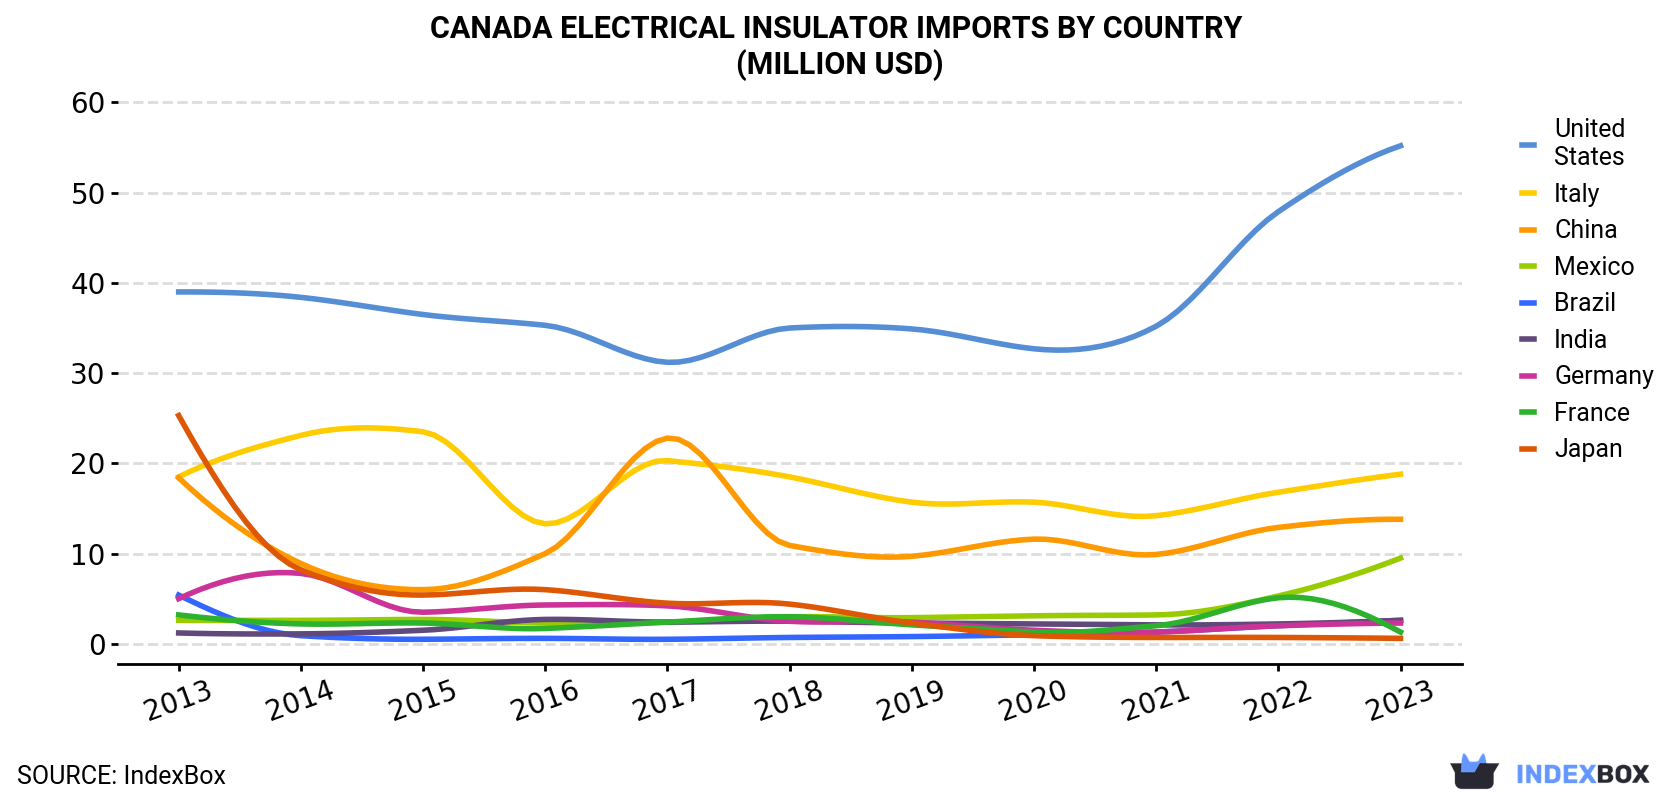 Canada Electrical Insulator Imports By Country (Million USD)